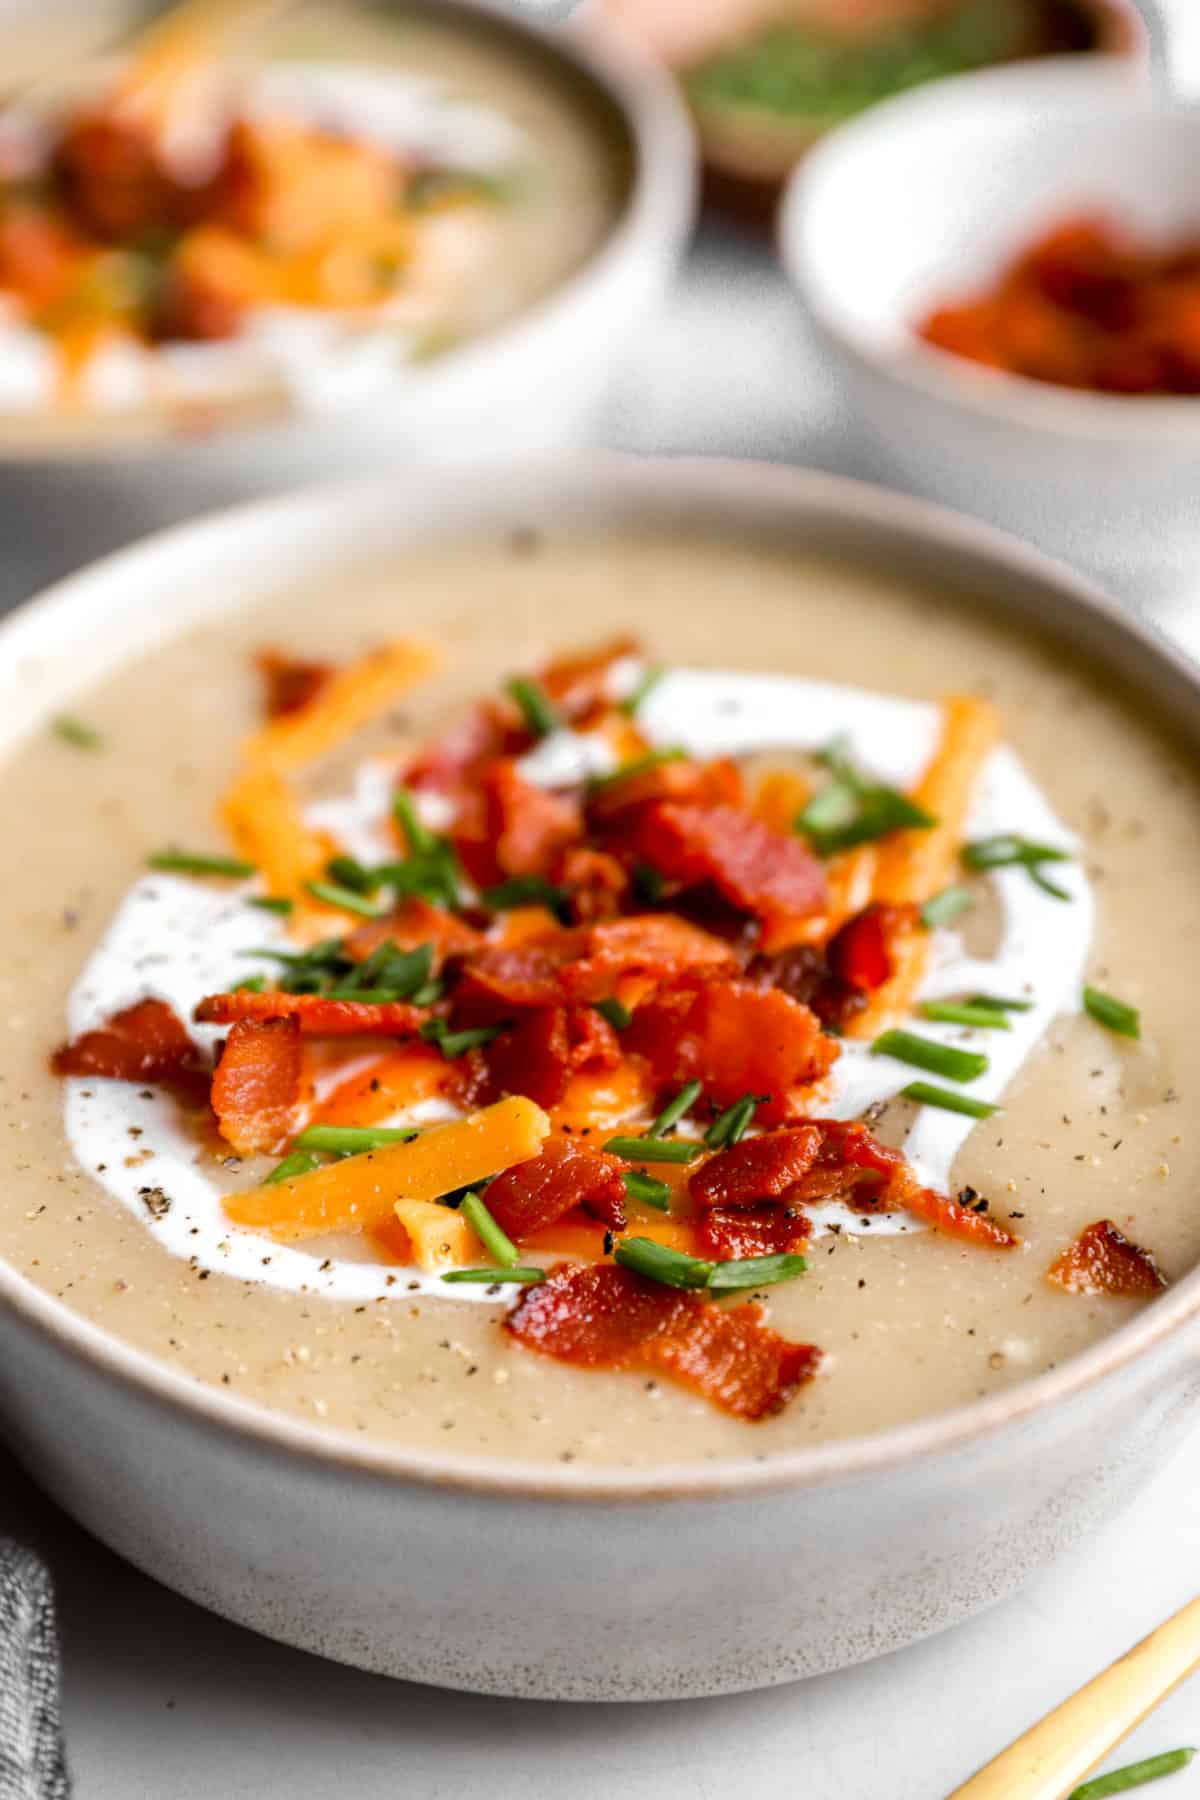 Side view of a bowl of potato soup with baked potato ingredients.